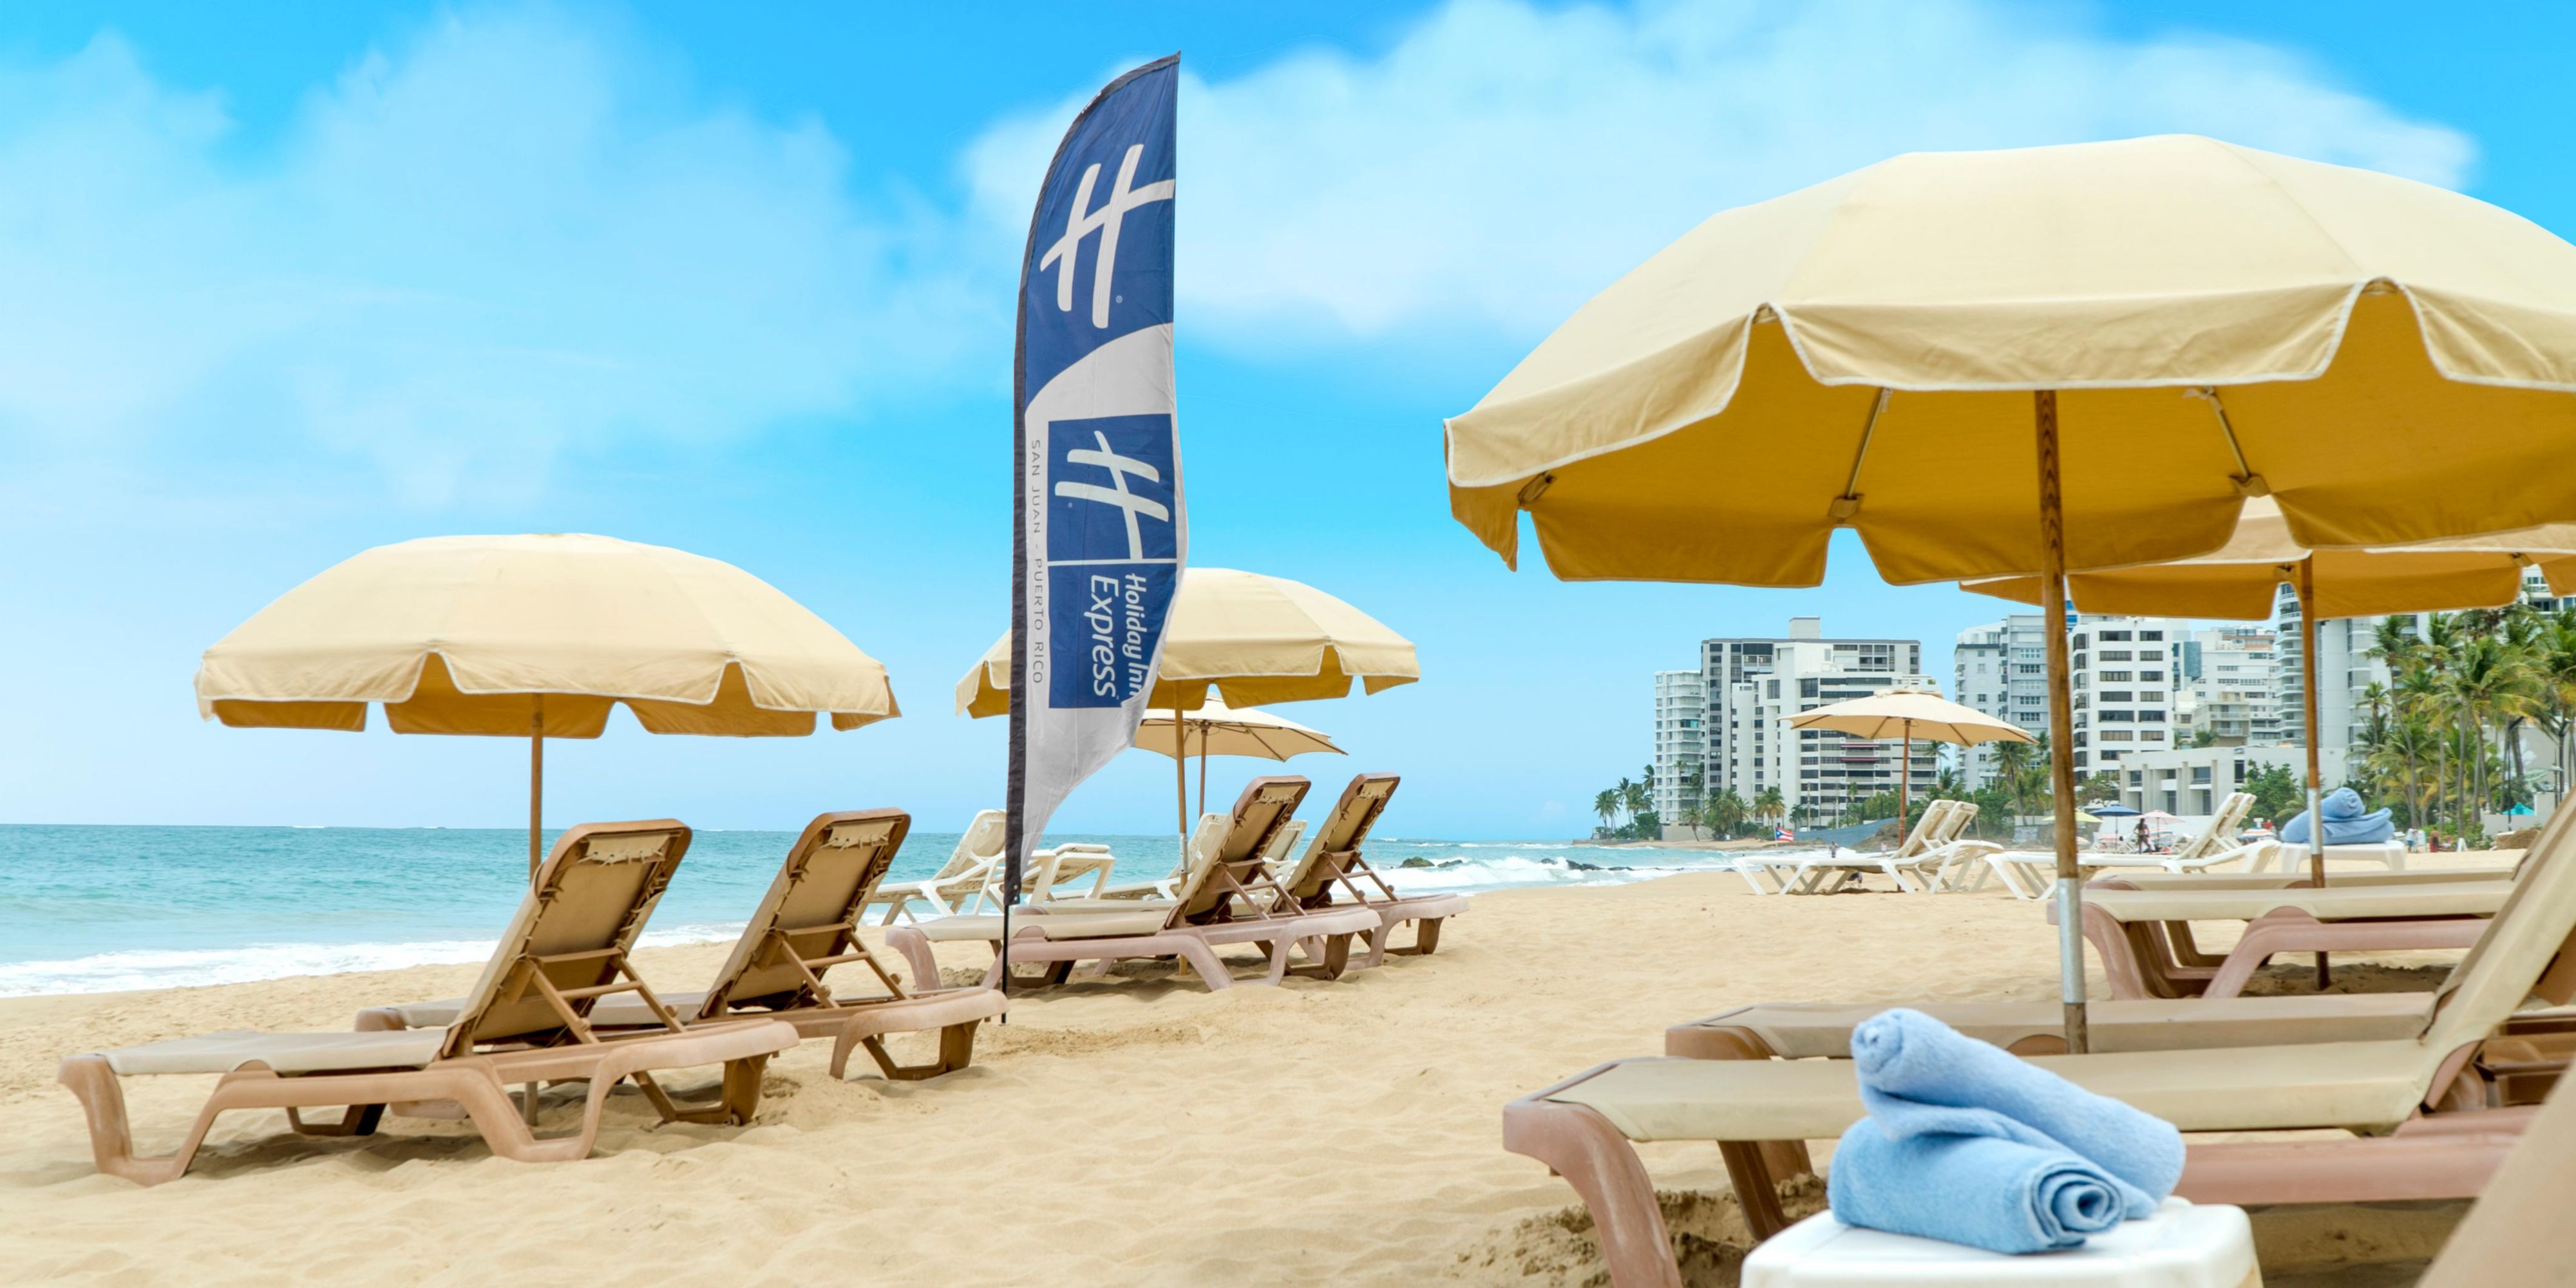 Beachfront view of chairs and umbrellas setup